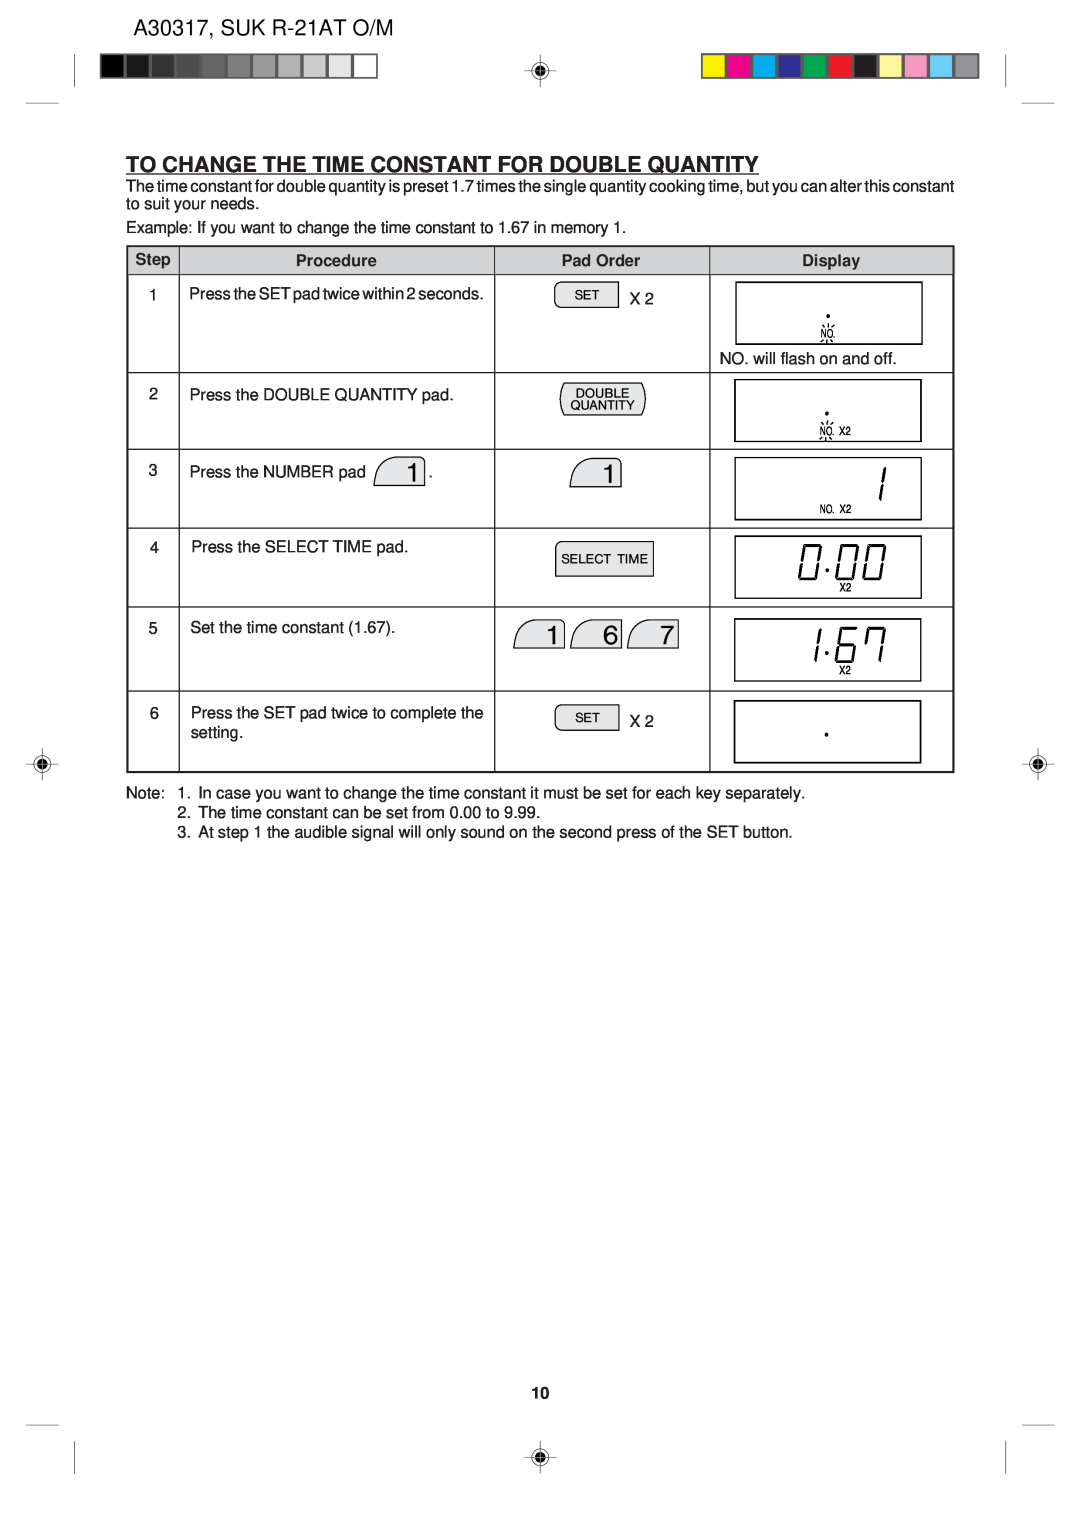 Sharp operation manual To Change The Time Constant For Double Quantity, A30317, SUK R-21AT O/M 